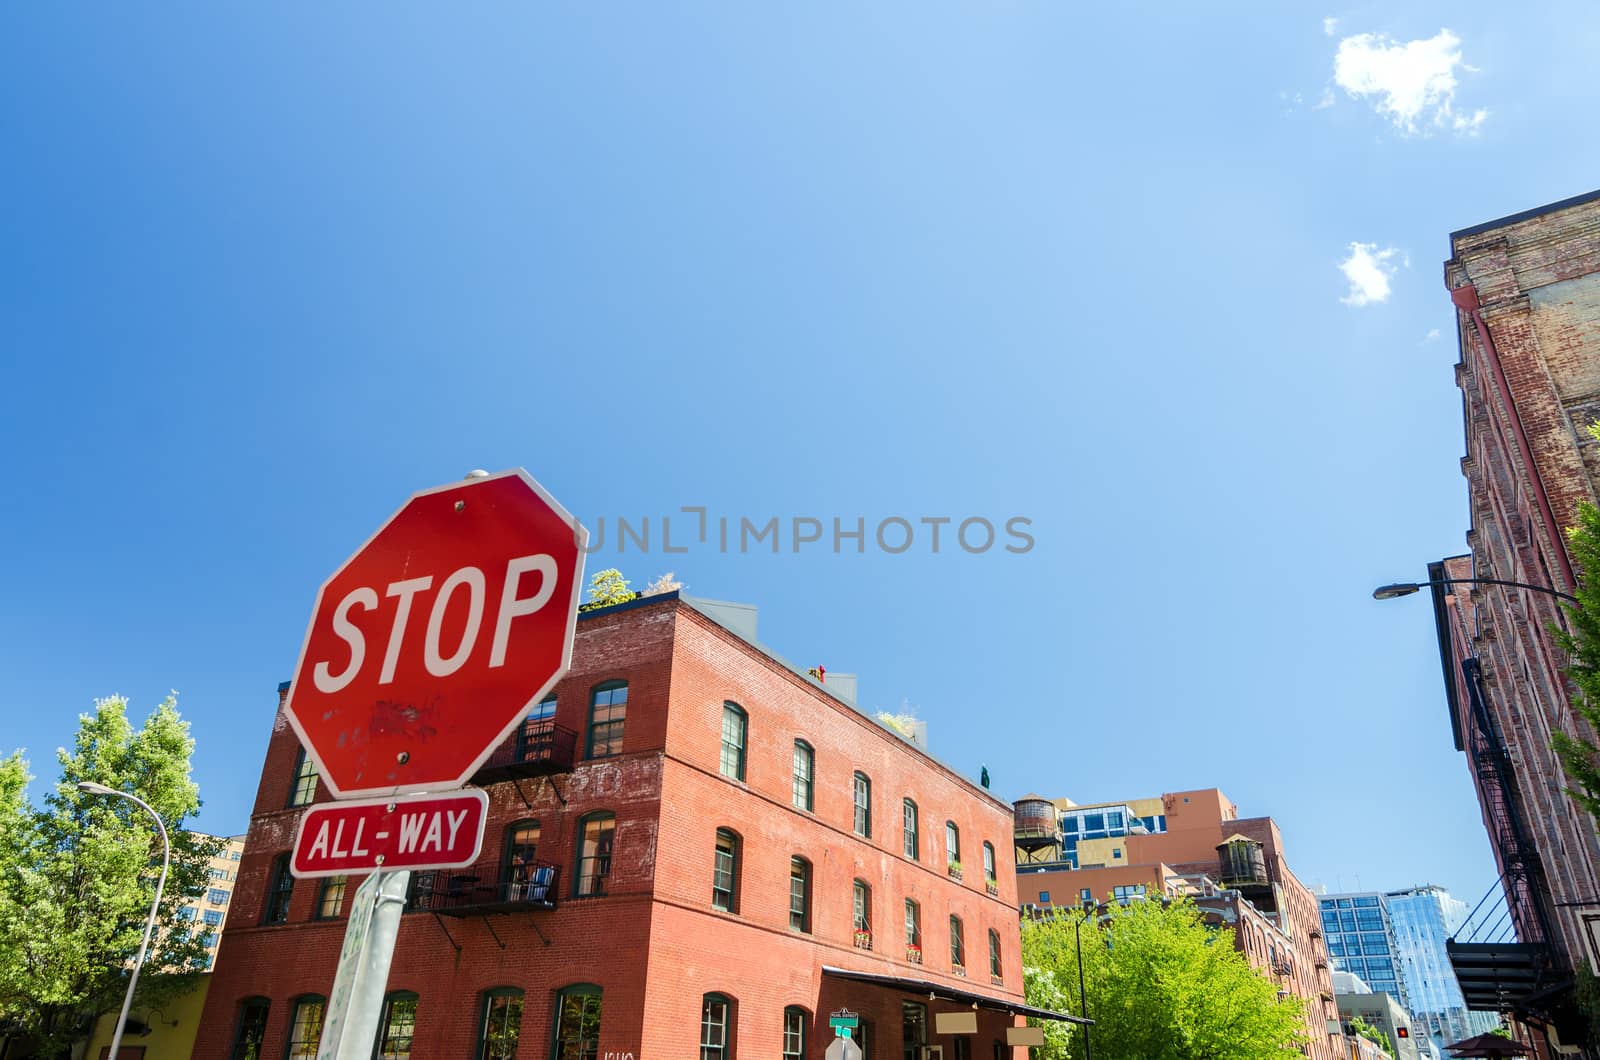 Brick building and stop sign on a street corner in Portland, Oregon